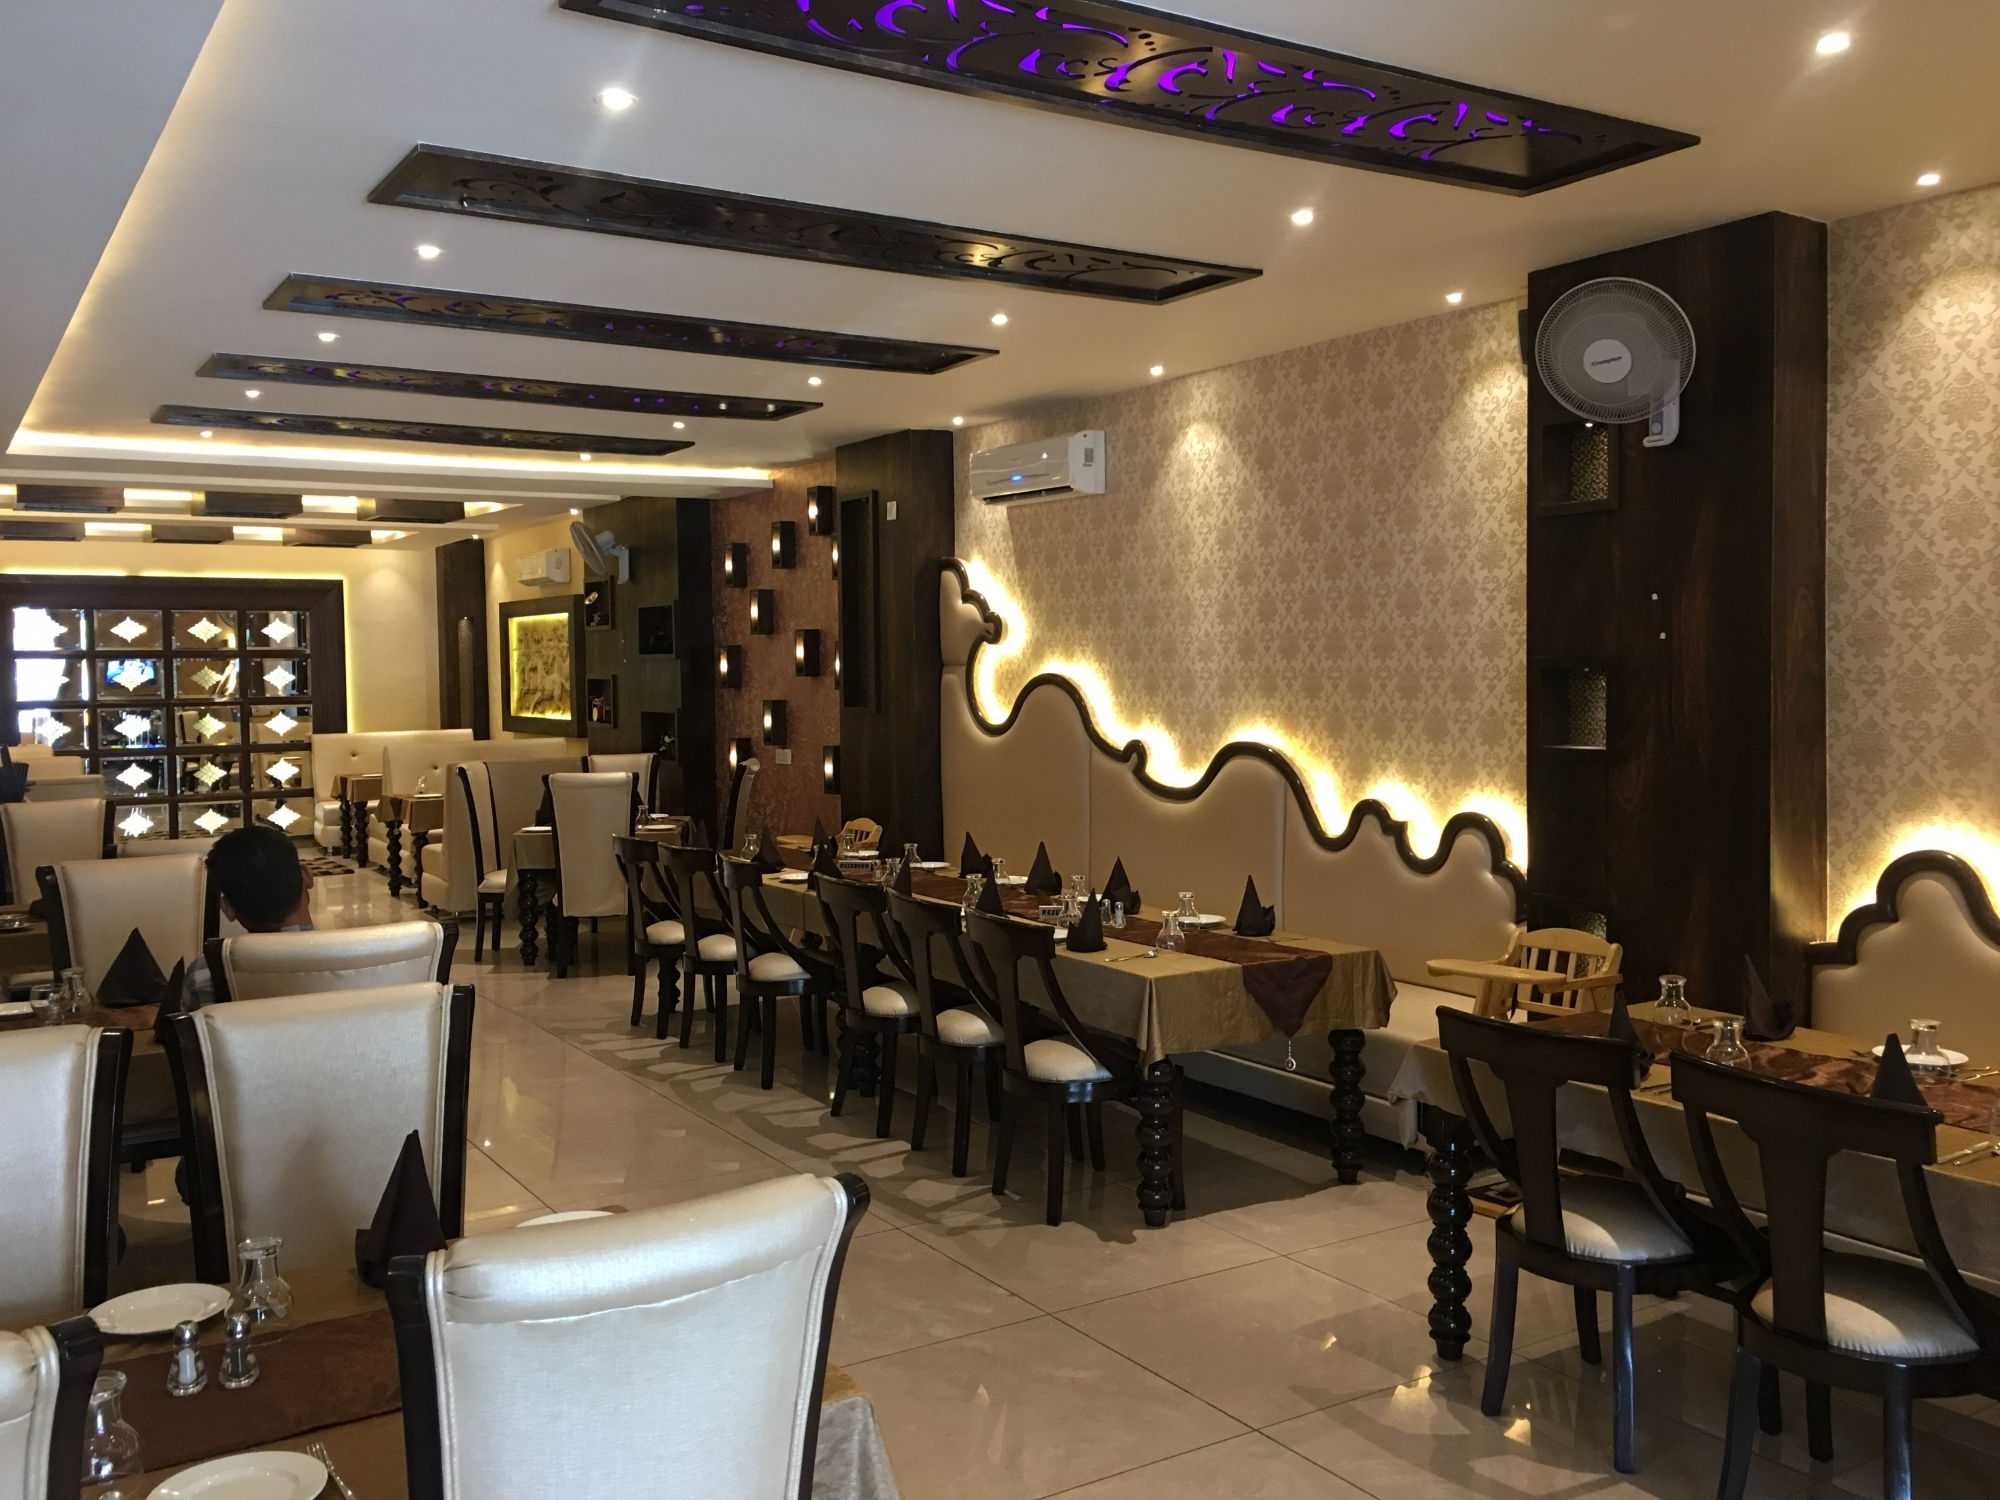 Sale of commercial Property with Restaurant Tenant in Gachib - Andhra Pradesh - Hyderabad ID1555775